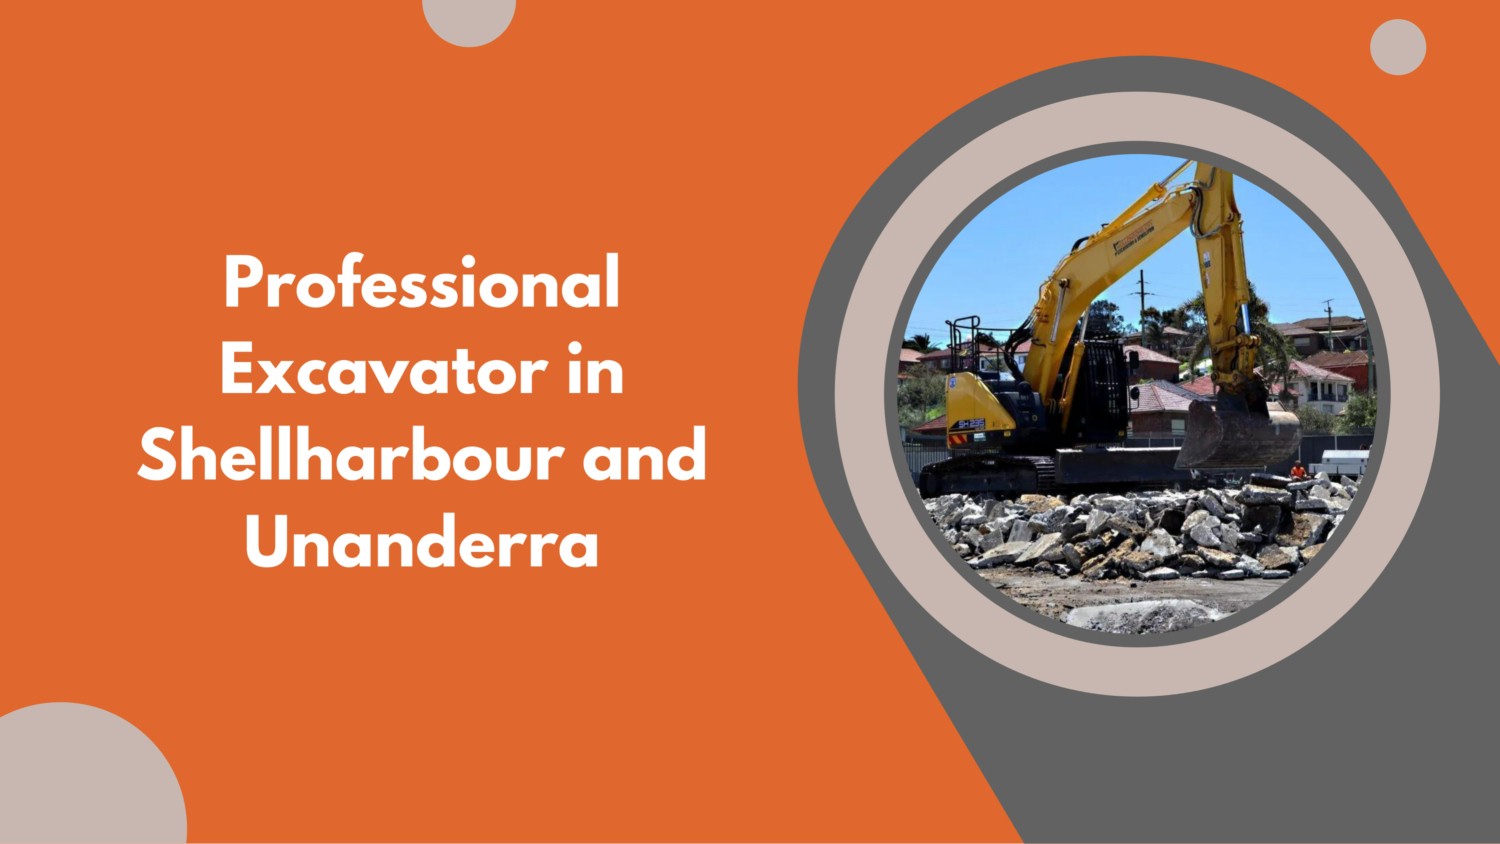 Professional Excavator in Shellharbour and Unanderra